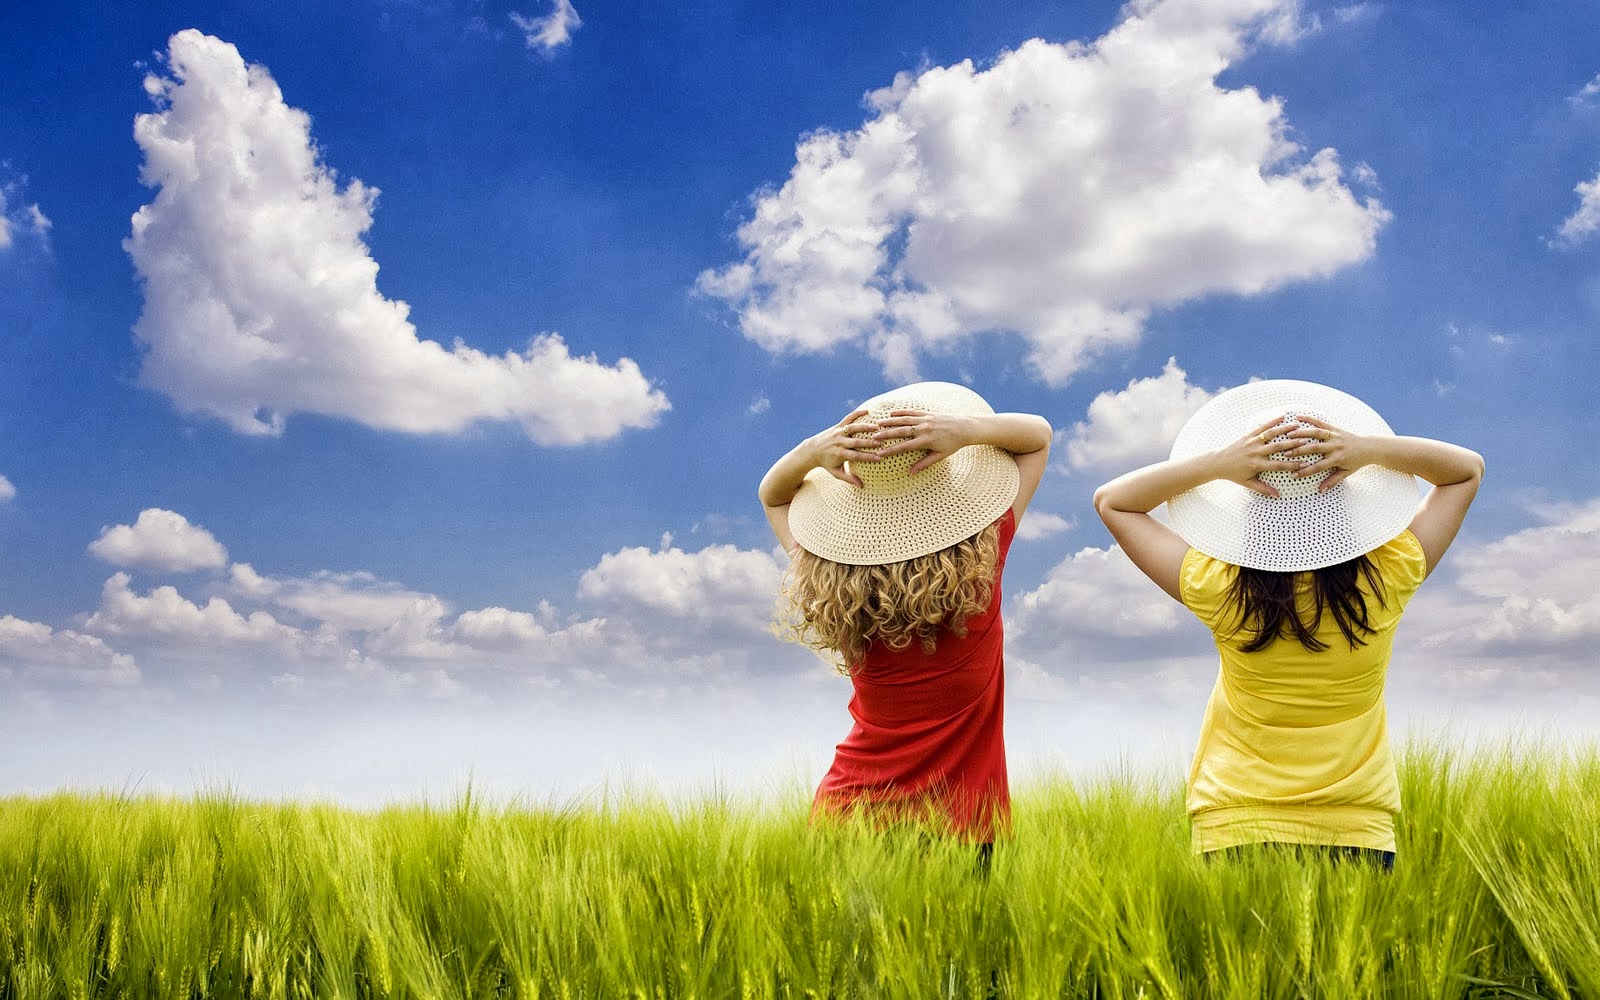 cute kids wallpaper,people in nature,sky,grass,grass family,happy